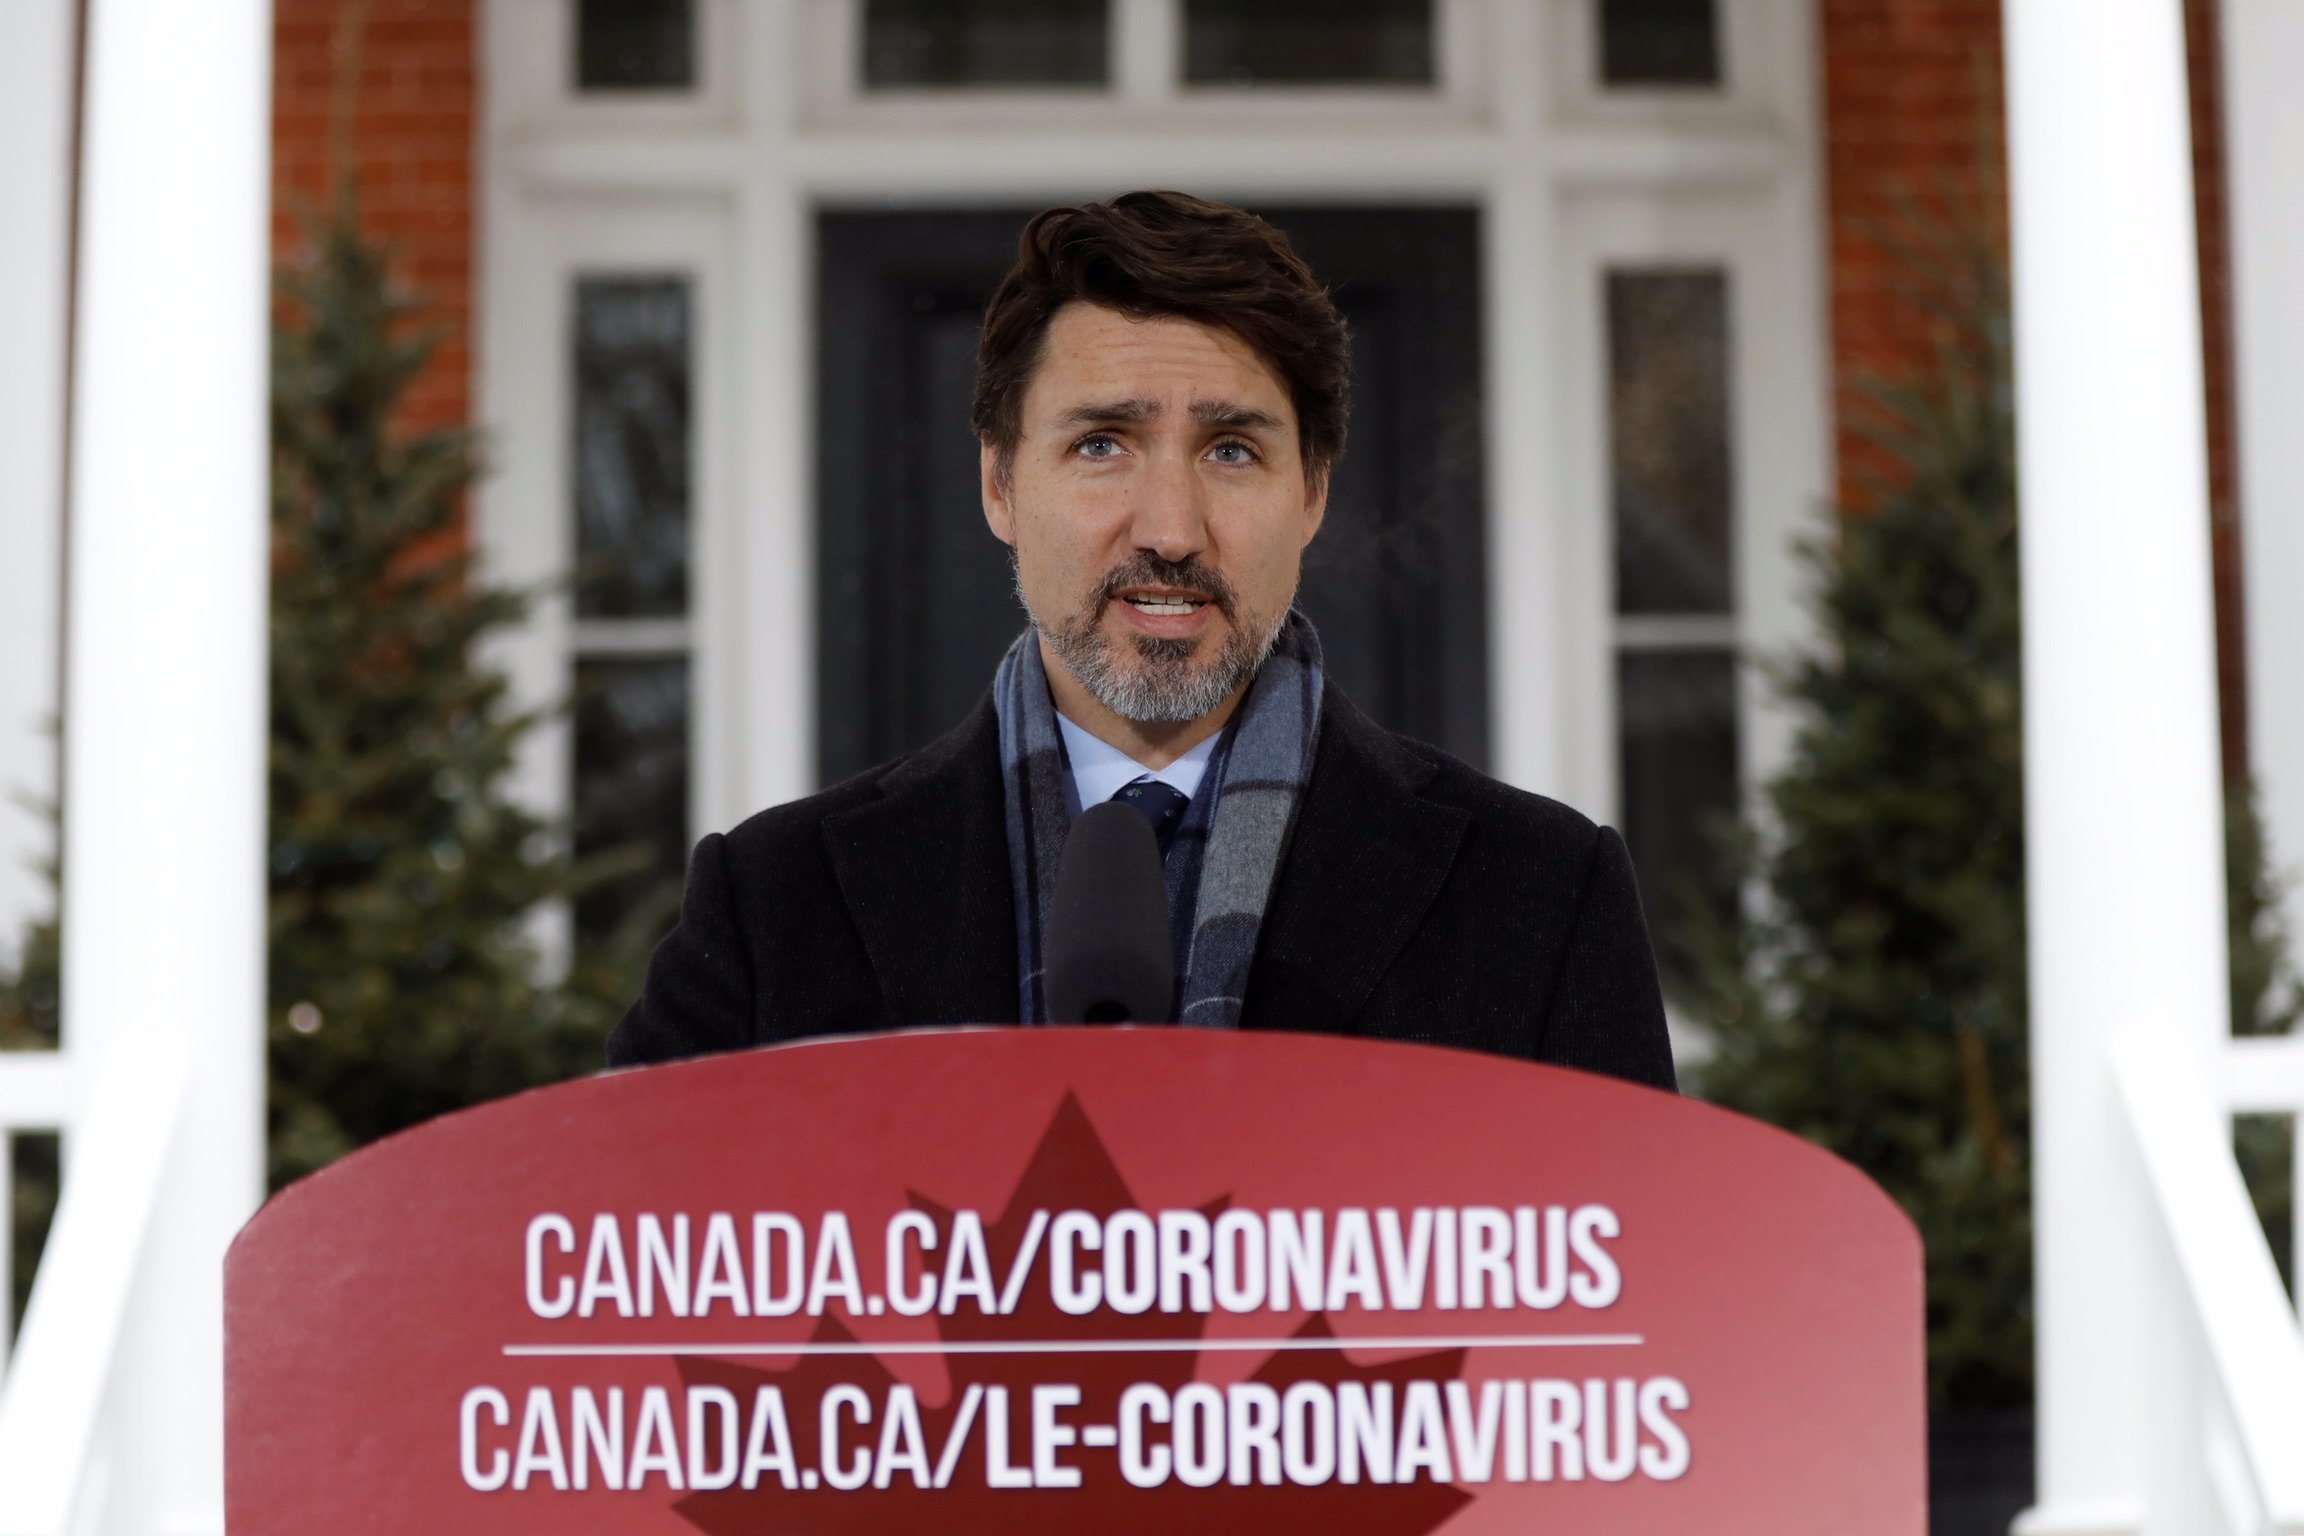 Canada's Prime Minister Justin Trudeau attends a news conference as efforts continue to help slow the spread of coronavirus disease (COVID-19) in Ottawa, Ontario, Canada March 23, 2020. REUTERS/Blair Gable 